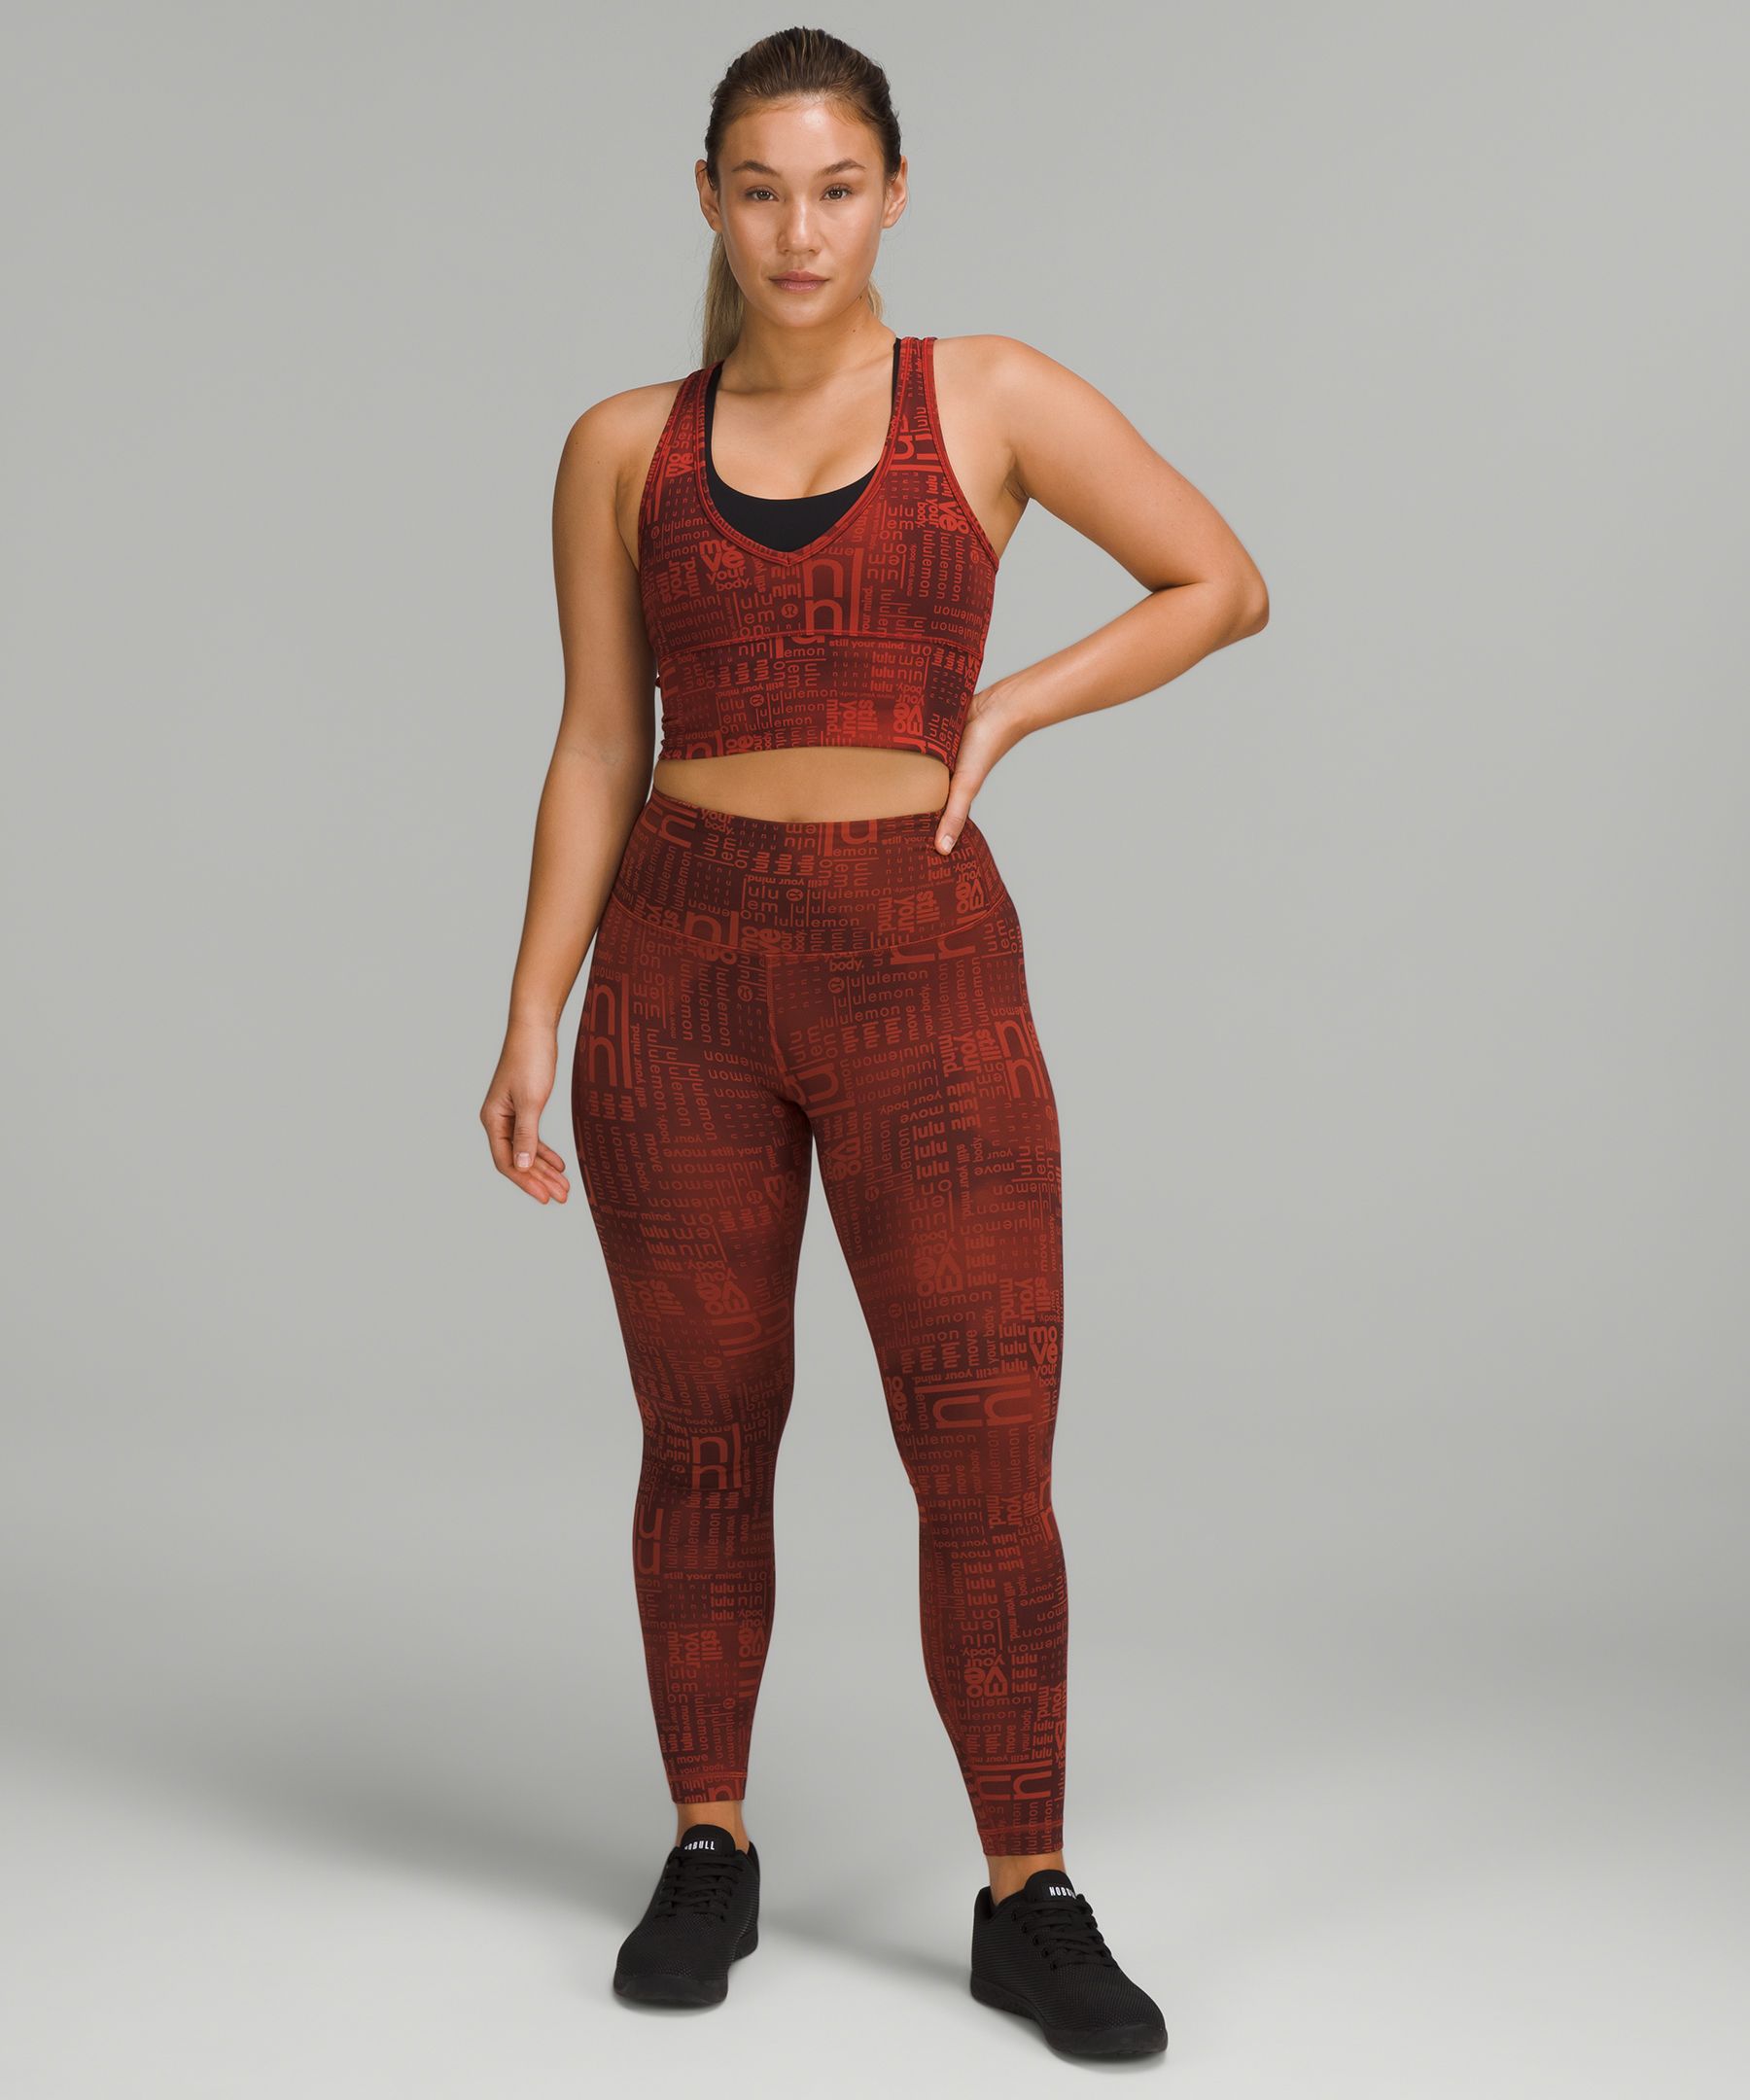 Active and Healthy Living with Fabletics Ambassadors 